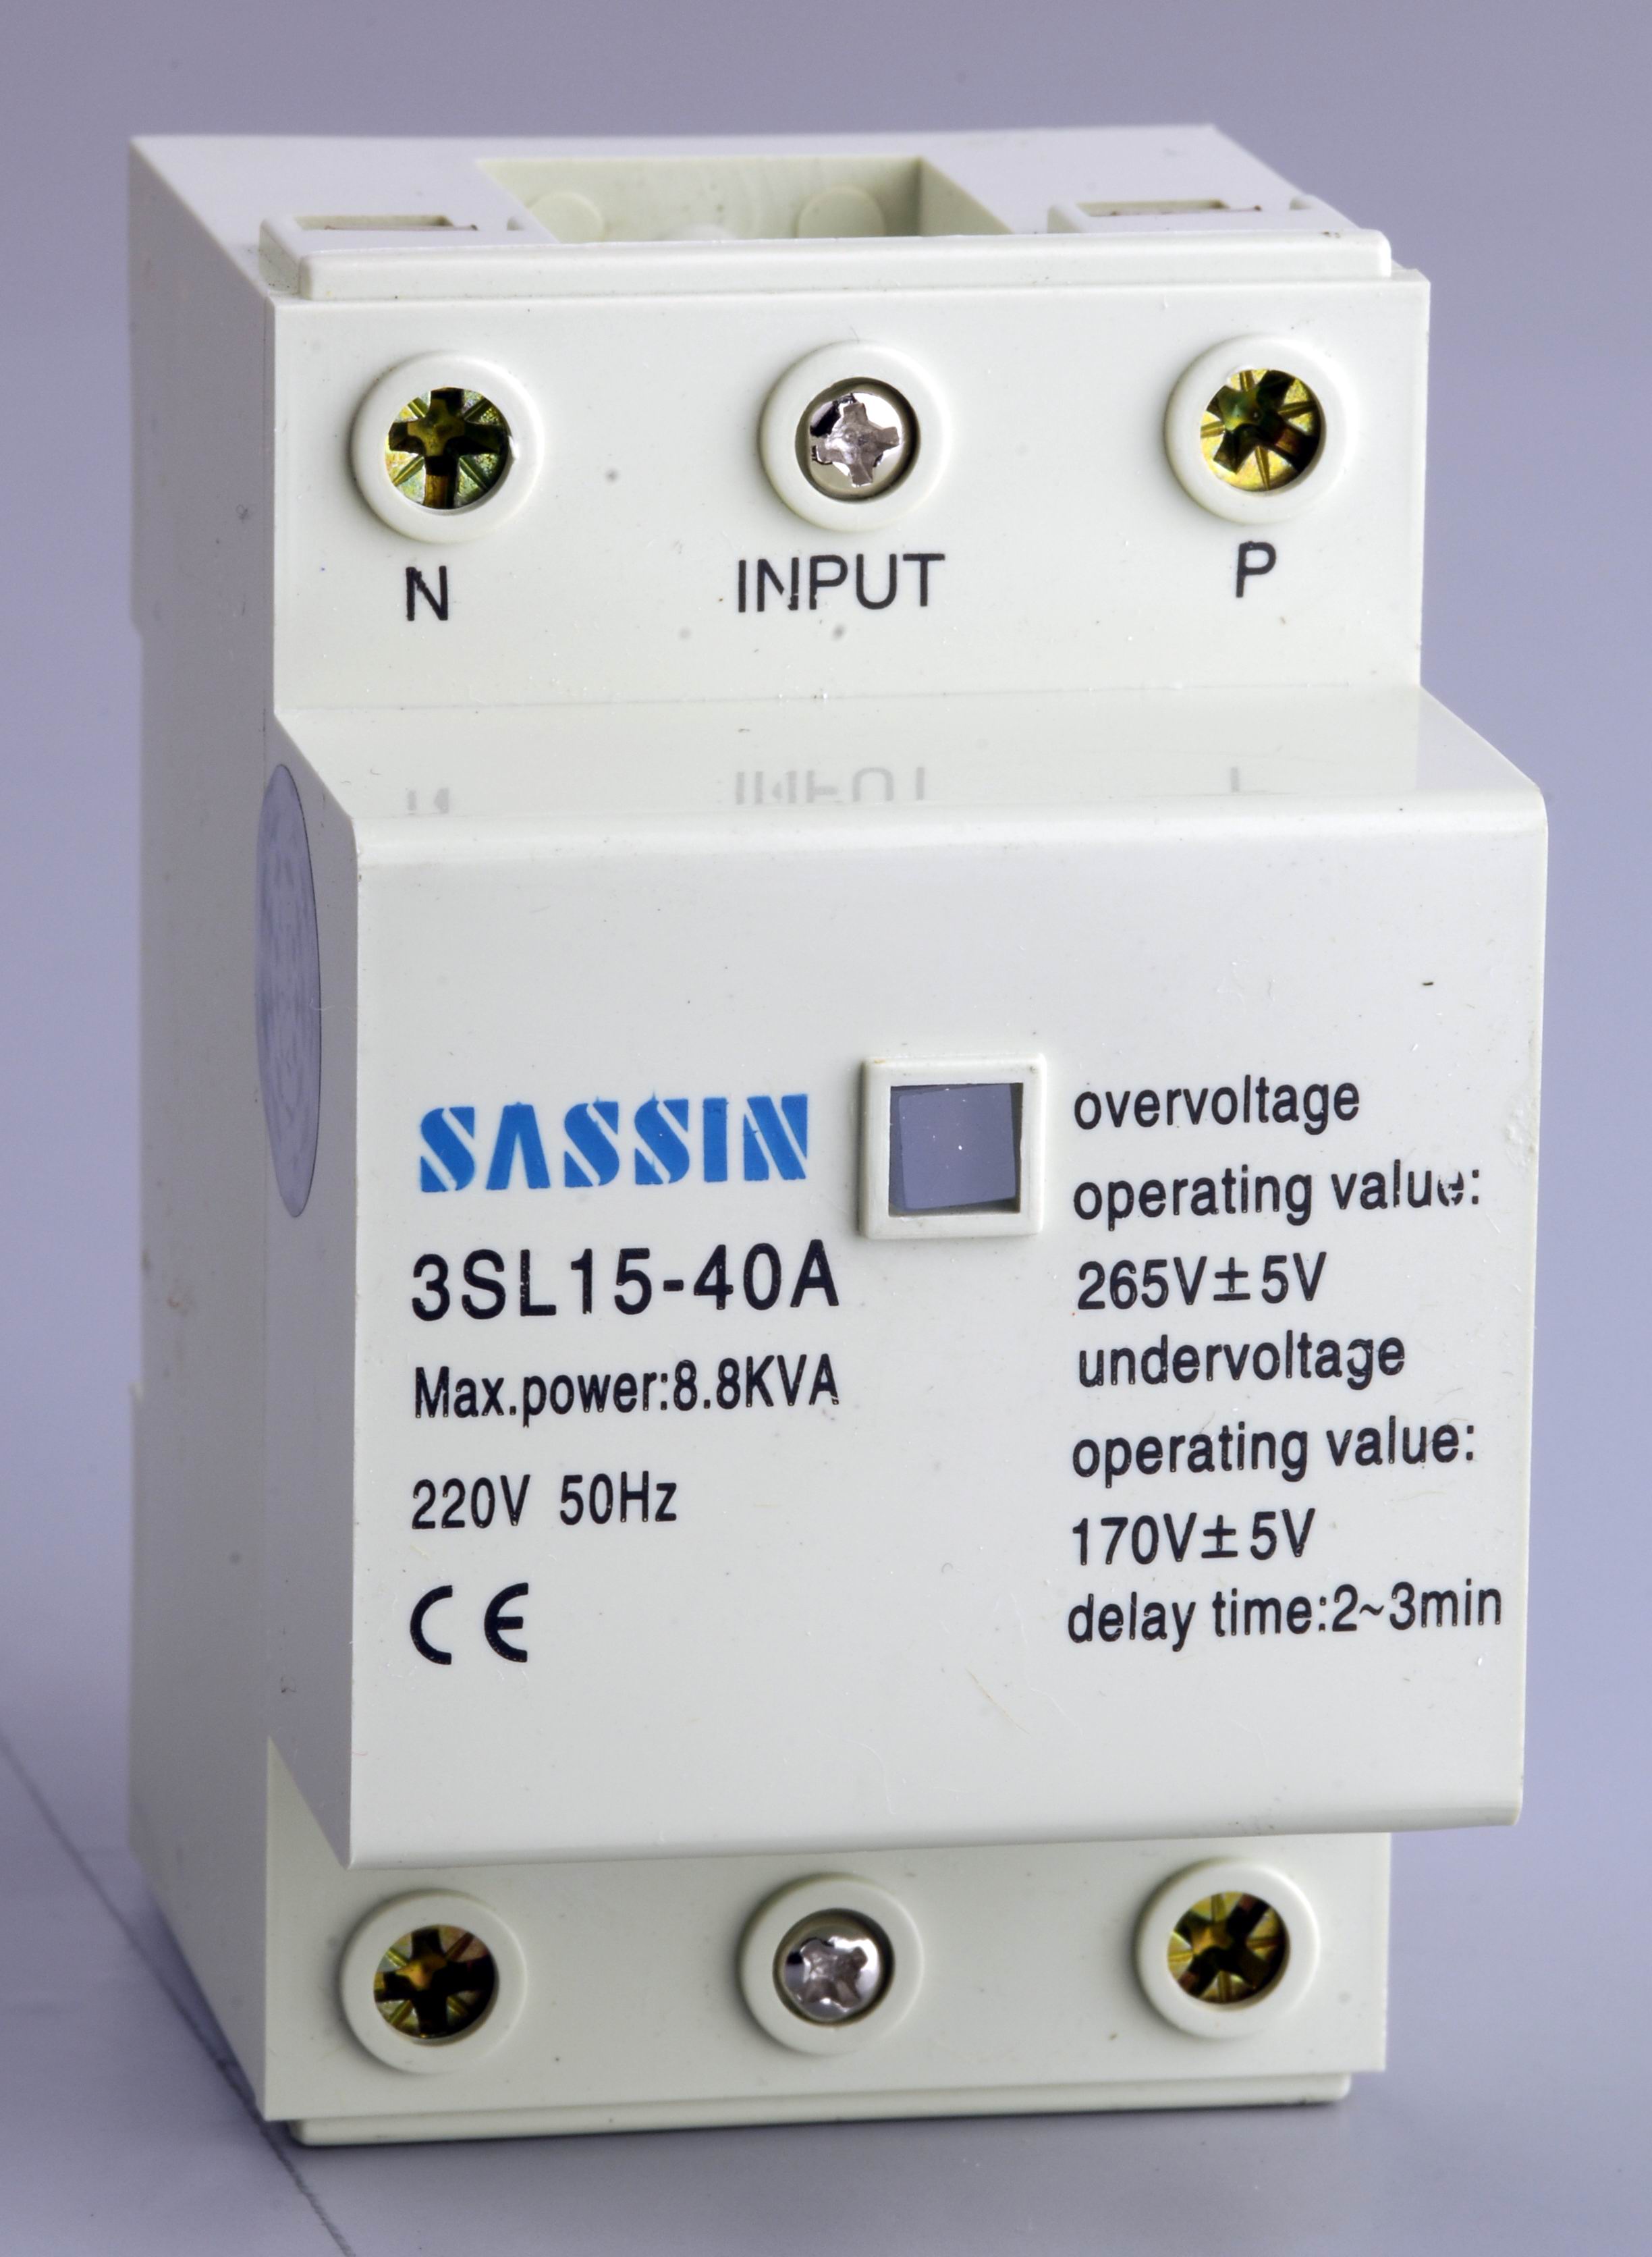 Full-automatic over-voltage/under-voltage protector 3SL15